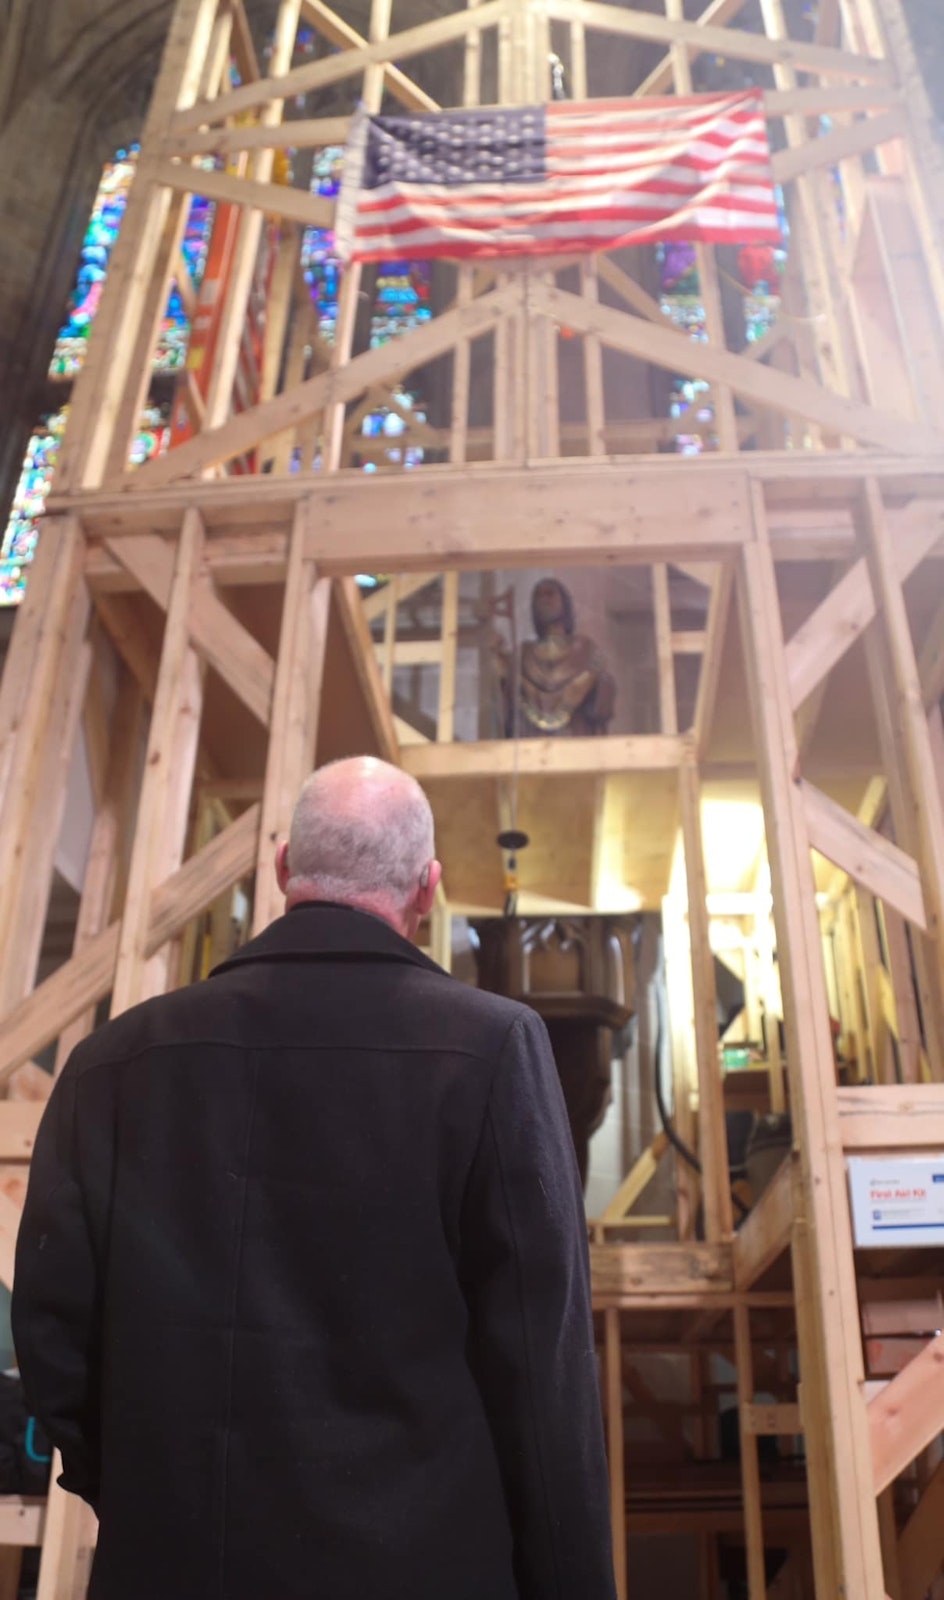 Fr. J.J. Mech looks on as a statue of St. James the Less is installed above its pillar in the Cathedral of the Most Blessed Sacrament in December.